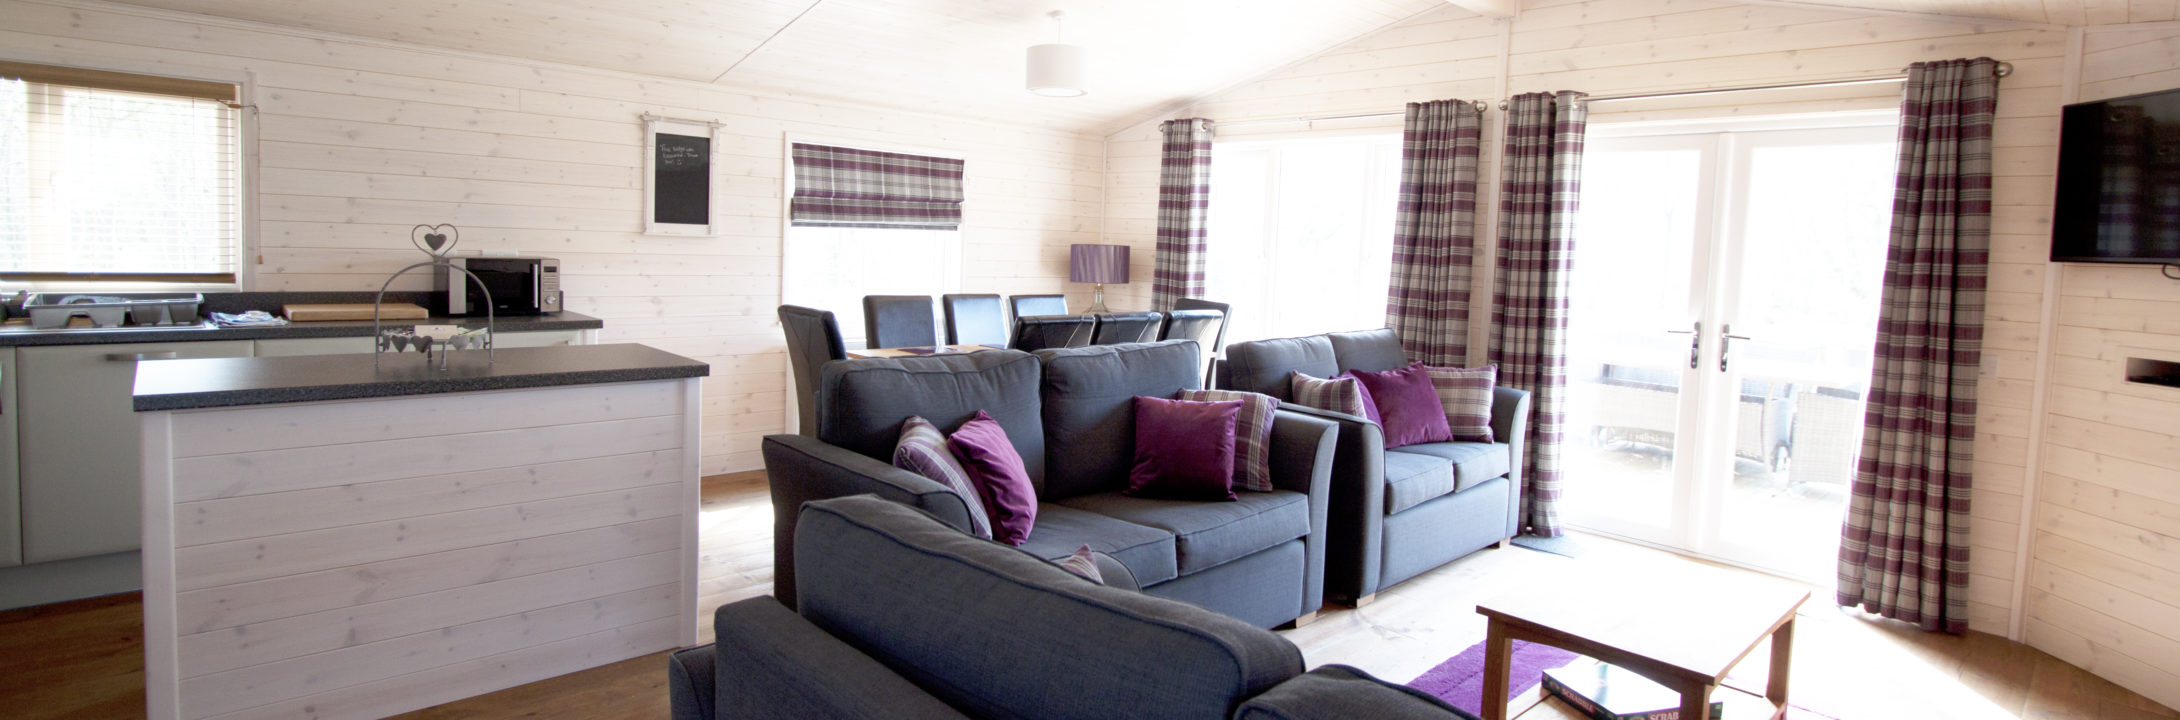 lodge holidays near lincoln, holiday cottages lincolnshire, glamping pods lincolnshire